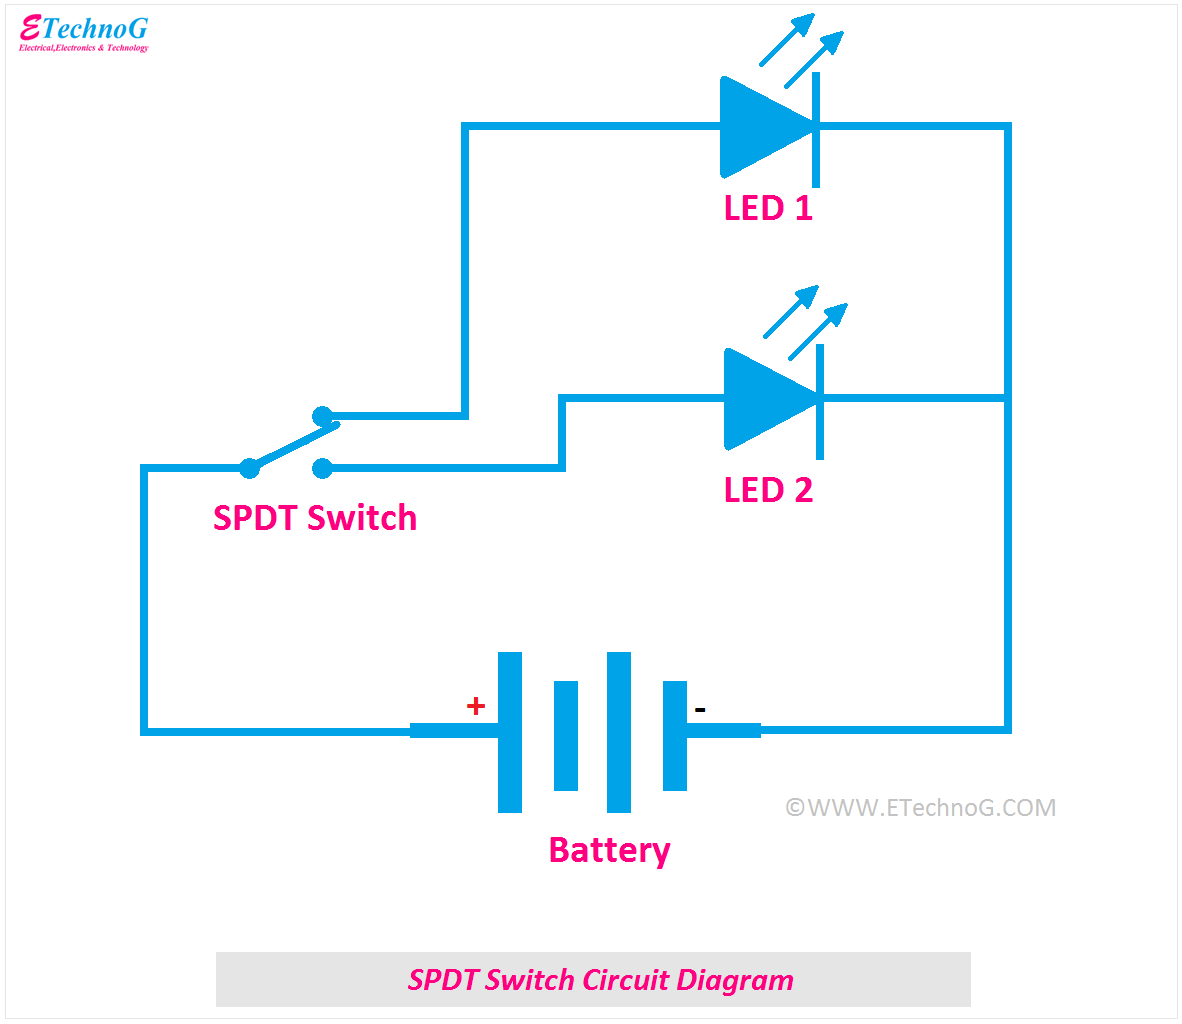 SPDT Switch Circuit Diagram, SPDT Switch Wiring Diagram and connection